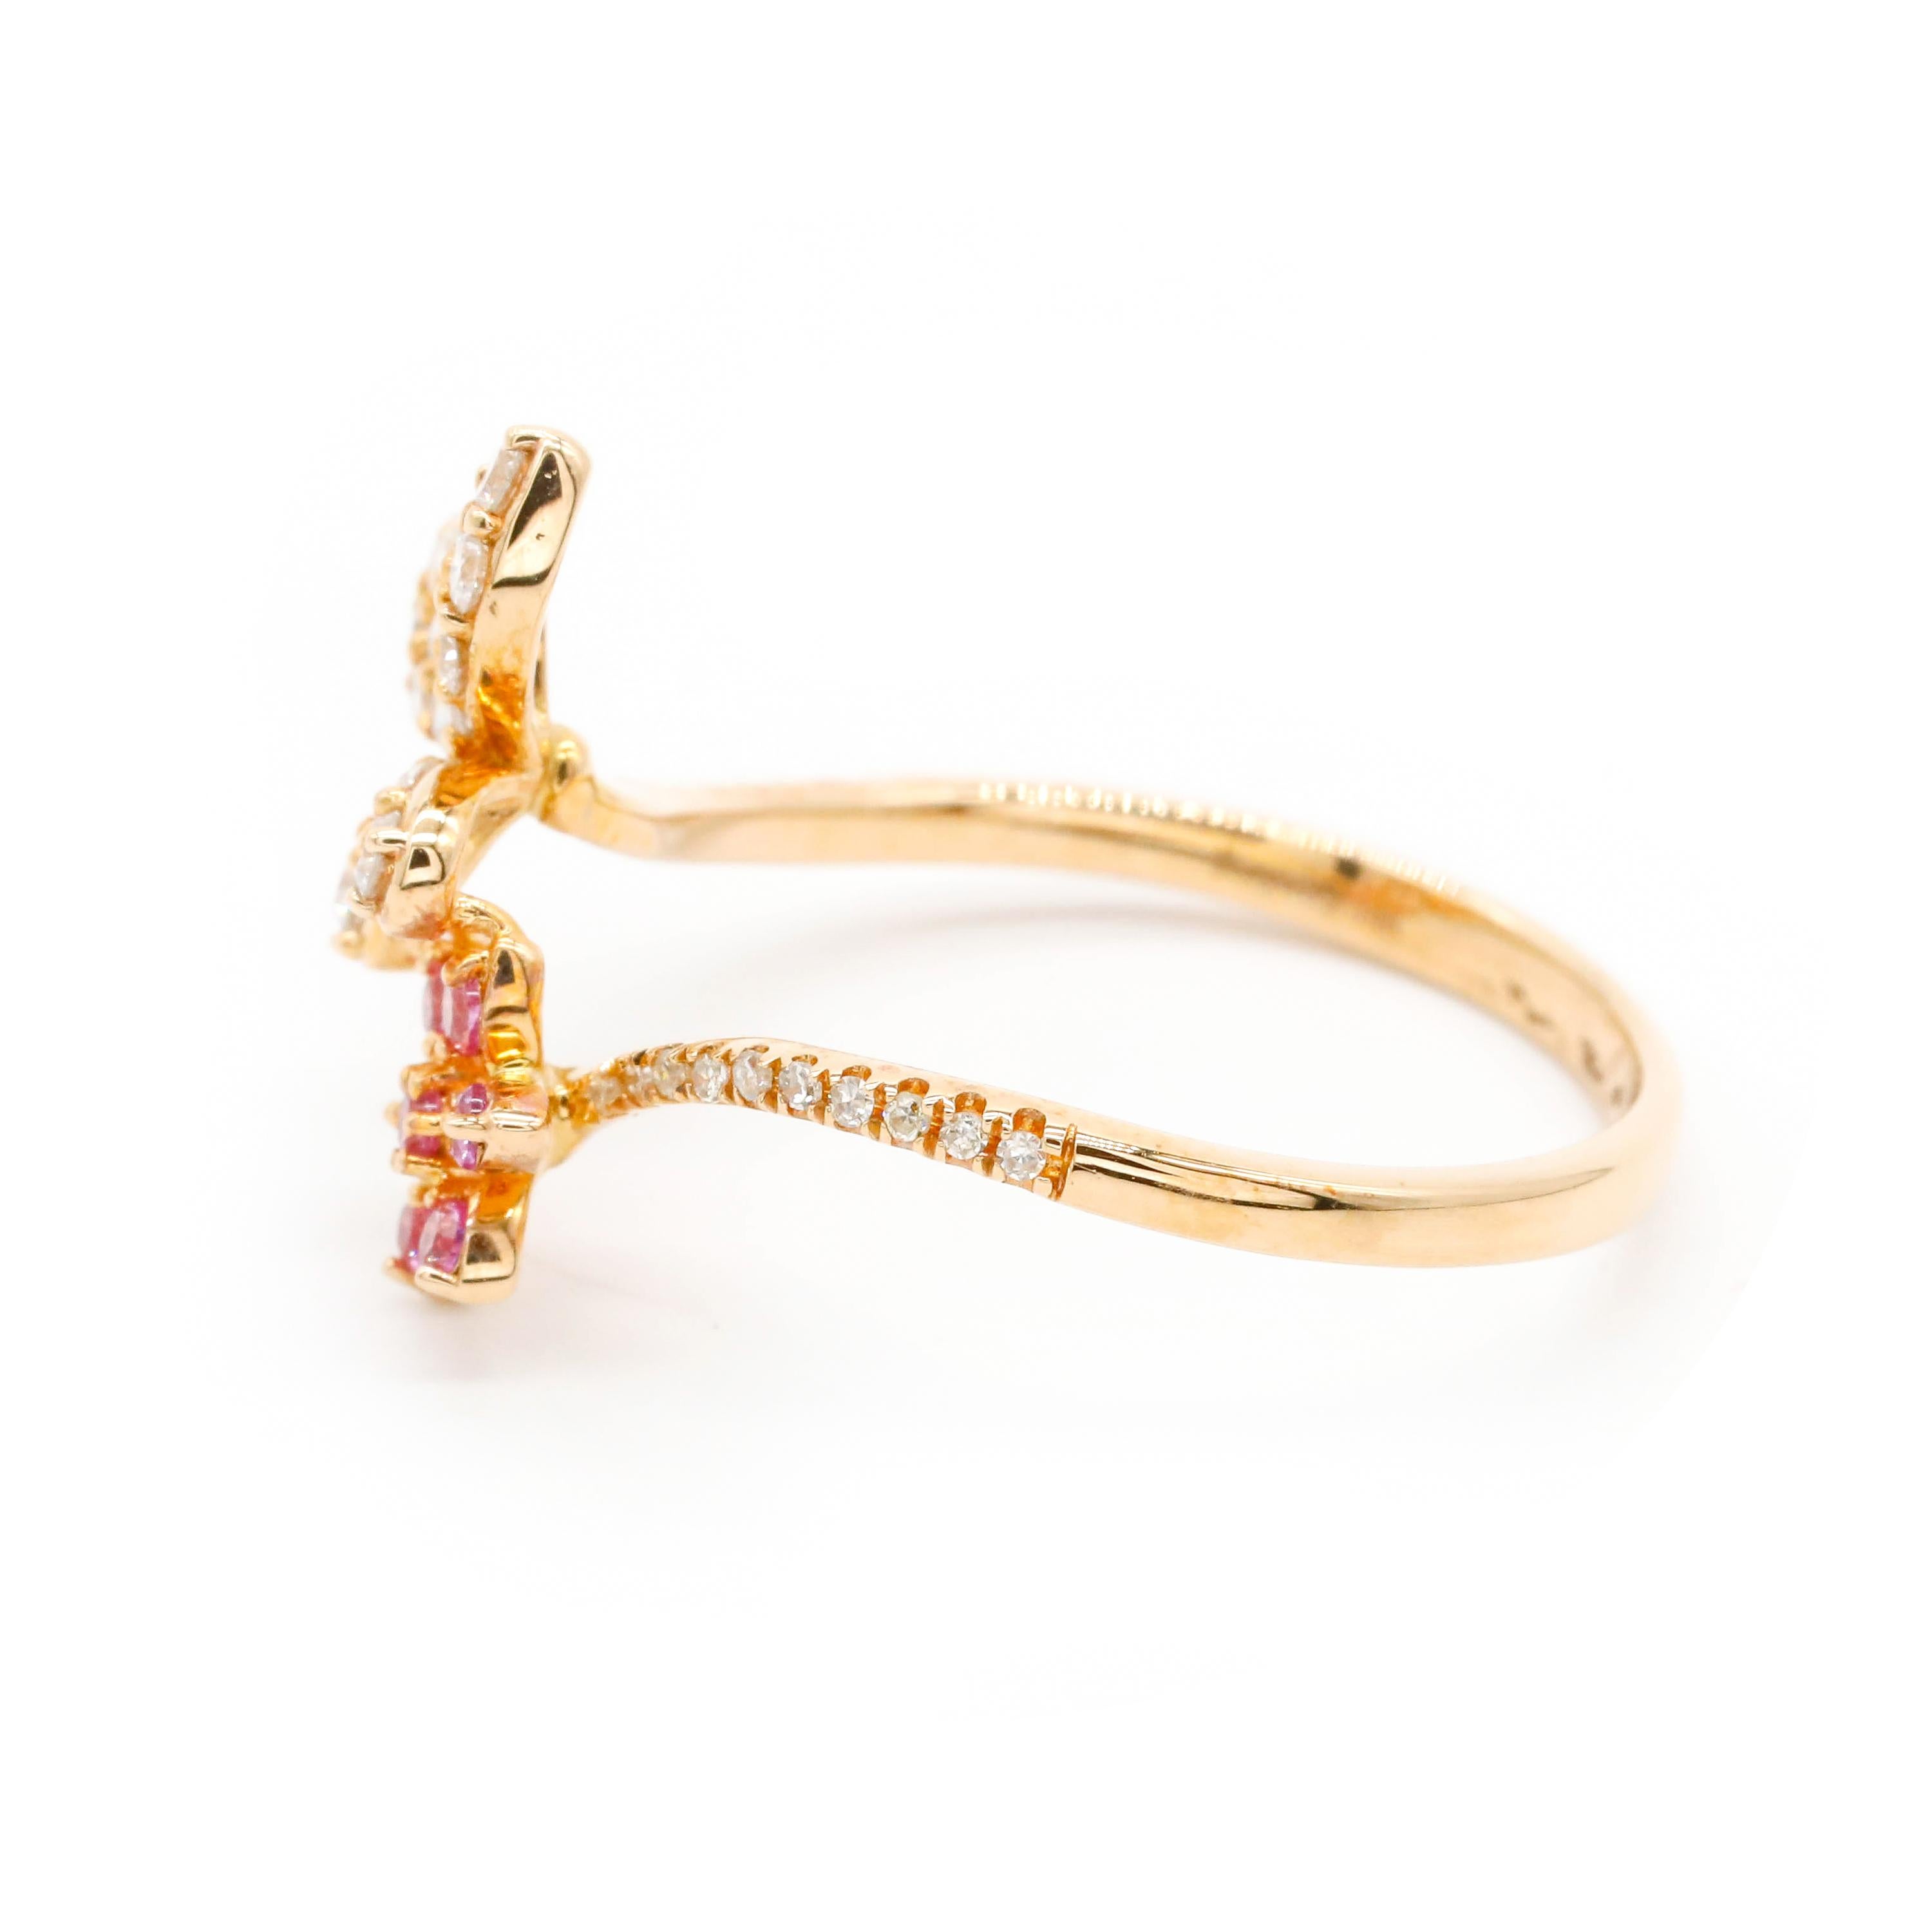 0.34 Ct Diamond and Pink Sapphire 14k Yellow Gold Daisy Flower Butterfly Ring

This modern ring features a total of 0.34 carats of diamond round shape and Pink Sapphire Gemstone Set in 14K Yellow Gold.

We guarantee all products sold and our number